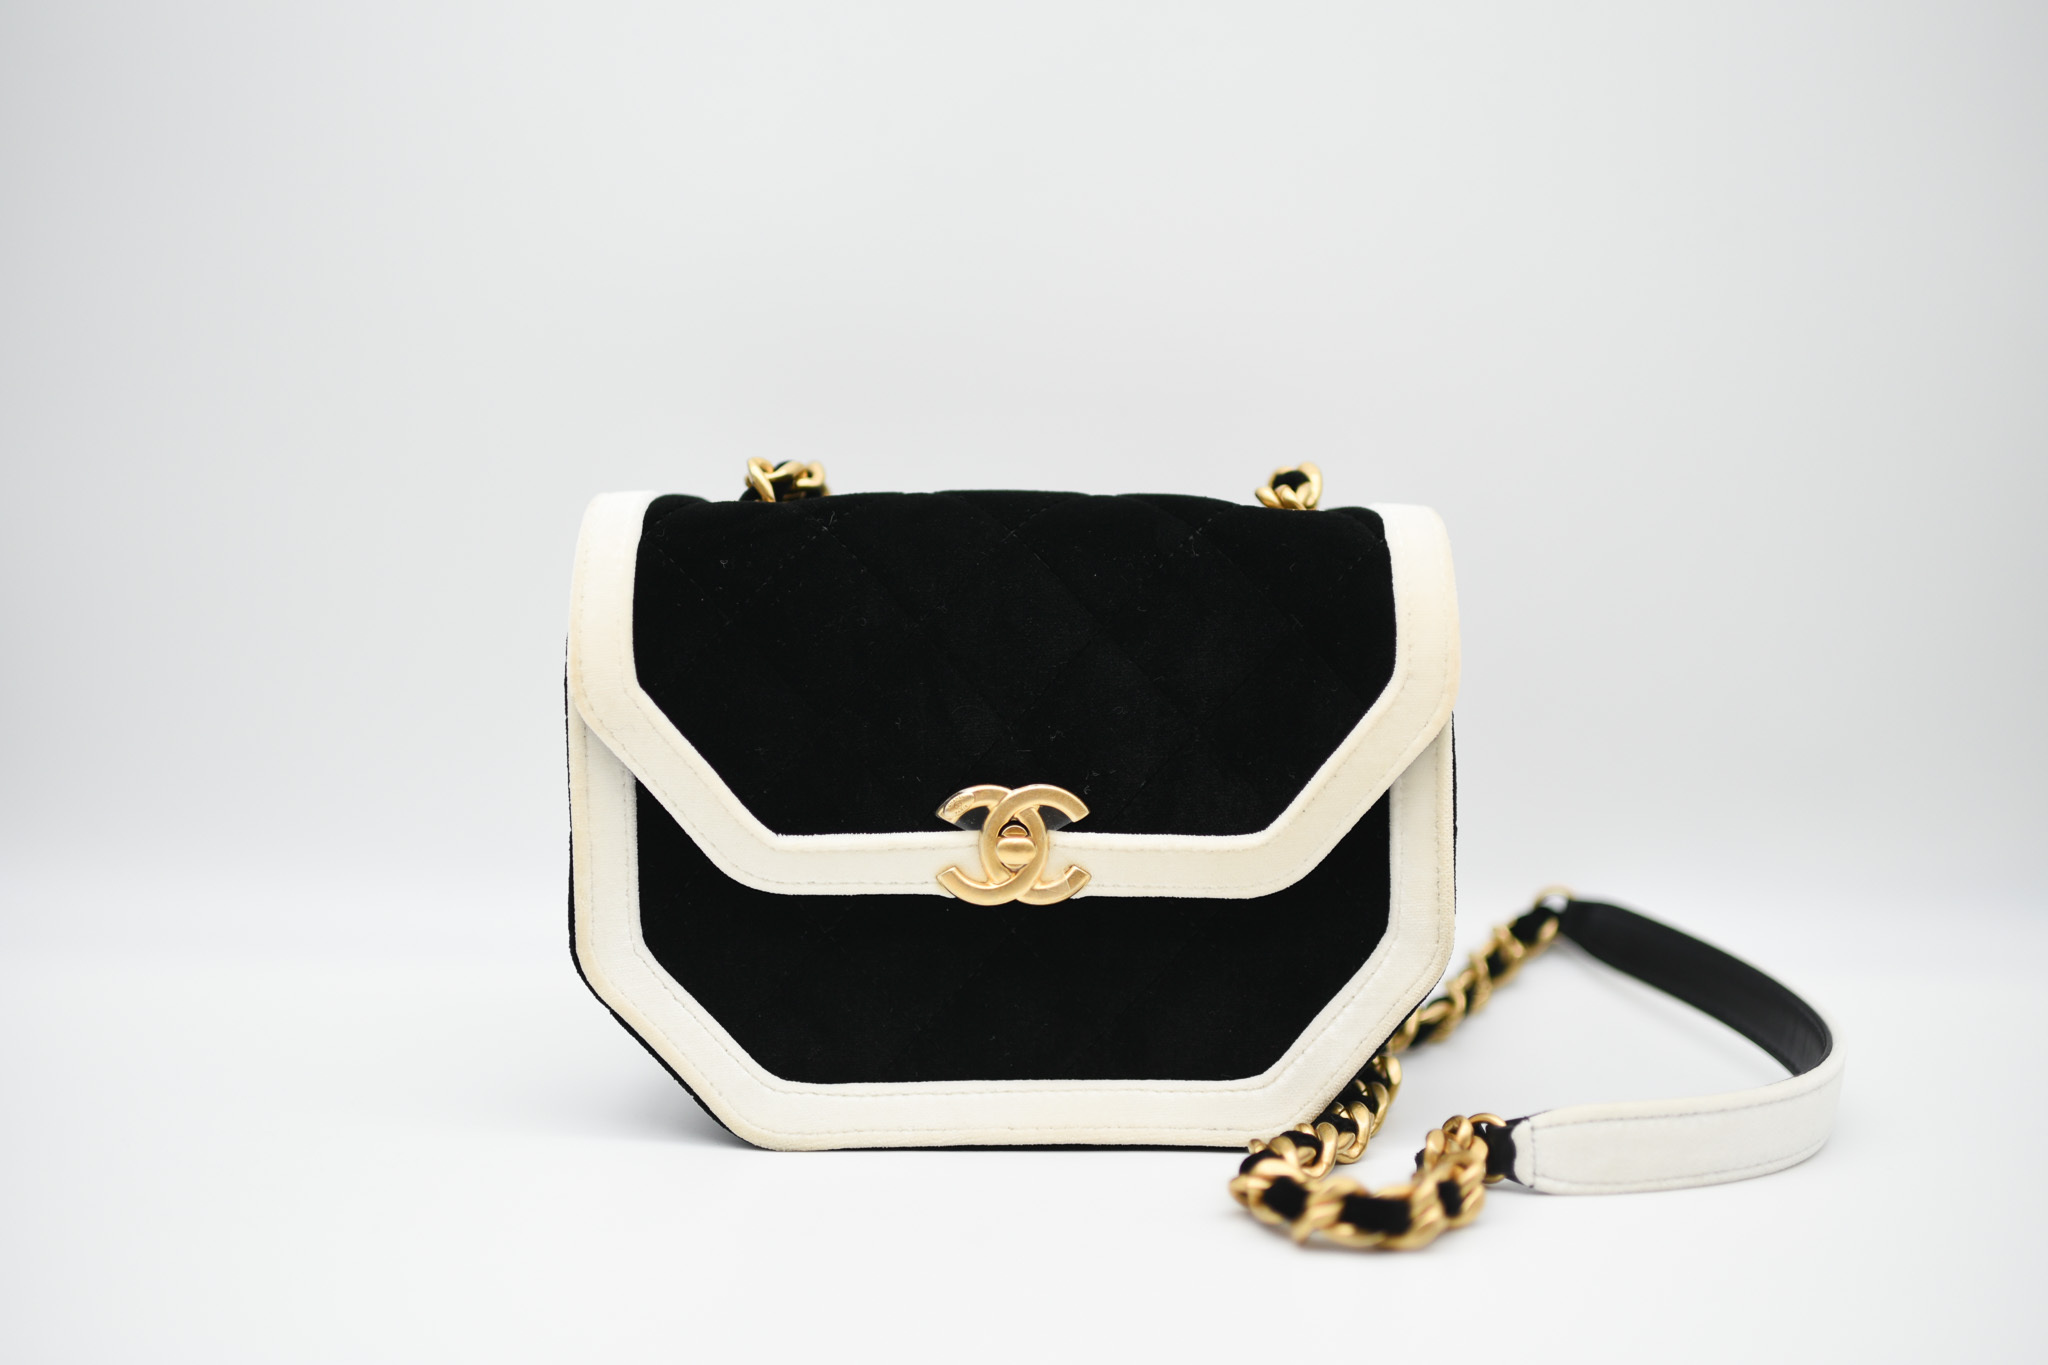 Chanel Enchained Flap Medium, White Leather with Brushed Gold Hardware,  Preowned in Dustbag CMA001